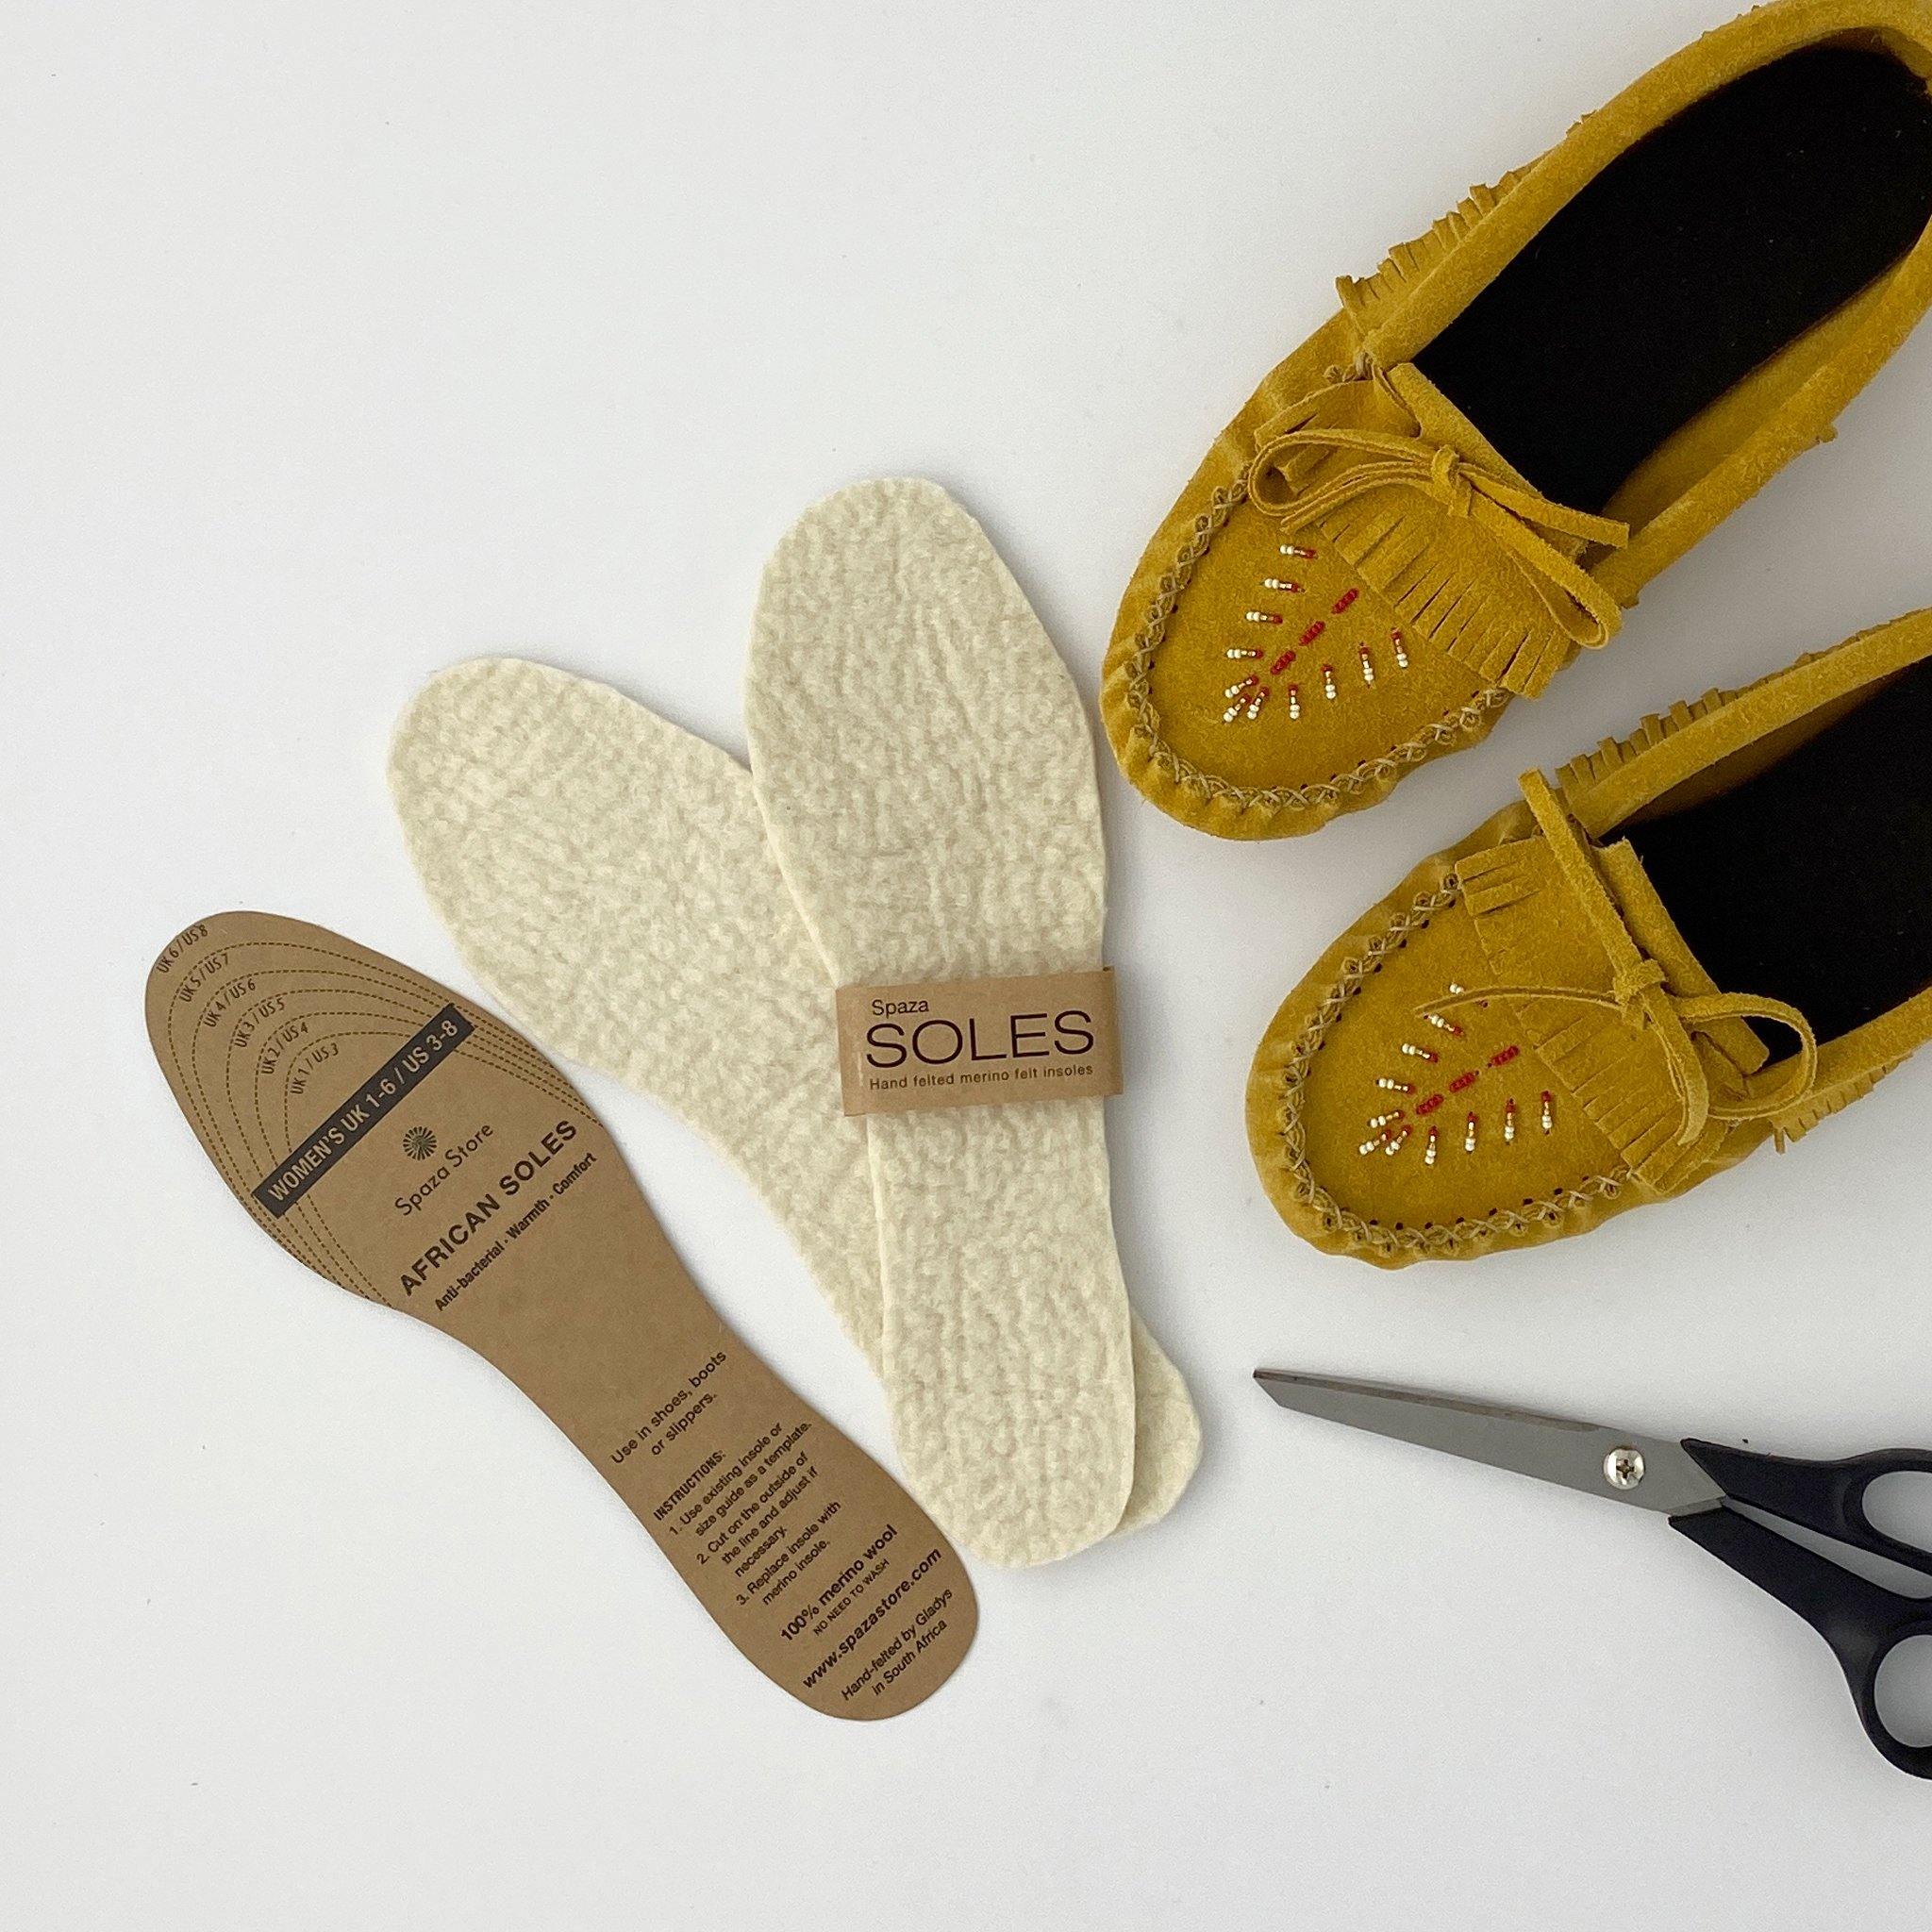 Felt Insoles: Merino Wool inserts for shoes, boots and slippers - spaza.store.com